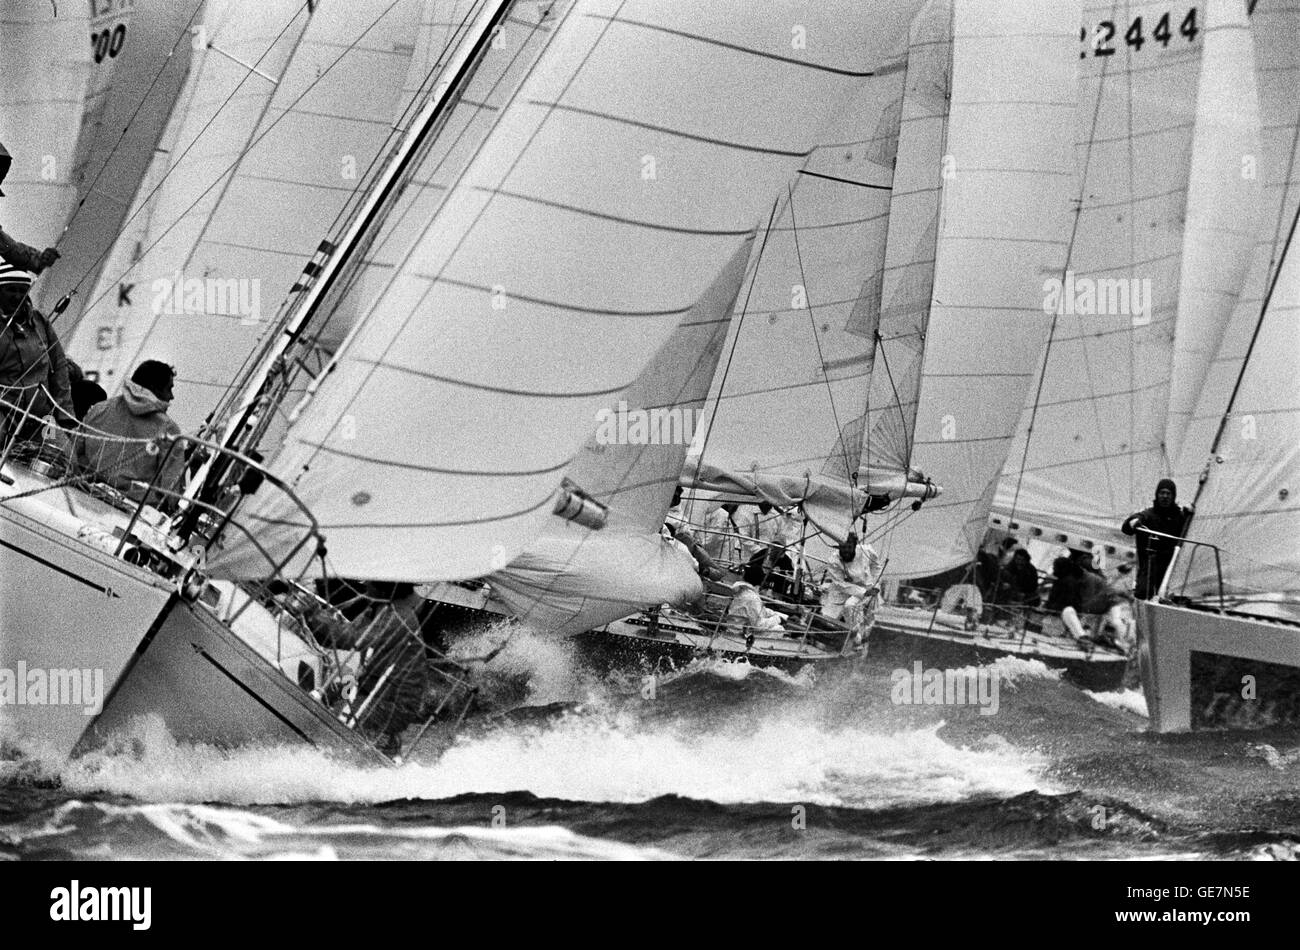 AJAXNETPHOTO. 1979. COWES, ENGLAND.  - ADMIRAL'S CUP - MASSED FLEET START OF THE FIRST INSHORE RACE ON THE ROYAL YACHT SQUADRON LINE IN WINDY CONDITIONS. PHOTO : JONATHAN EASTLAND / AJAX REF:2 1979 Stock Photo